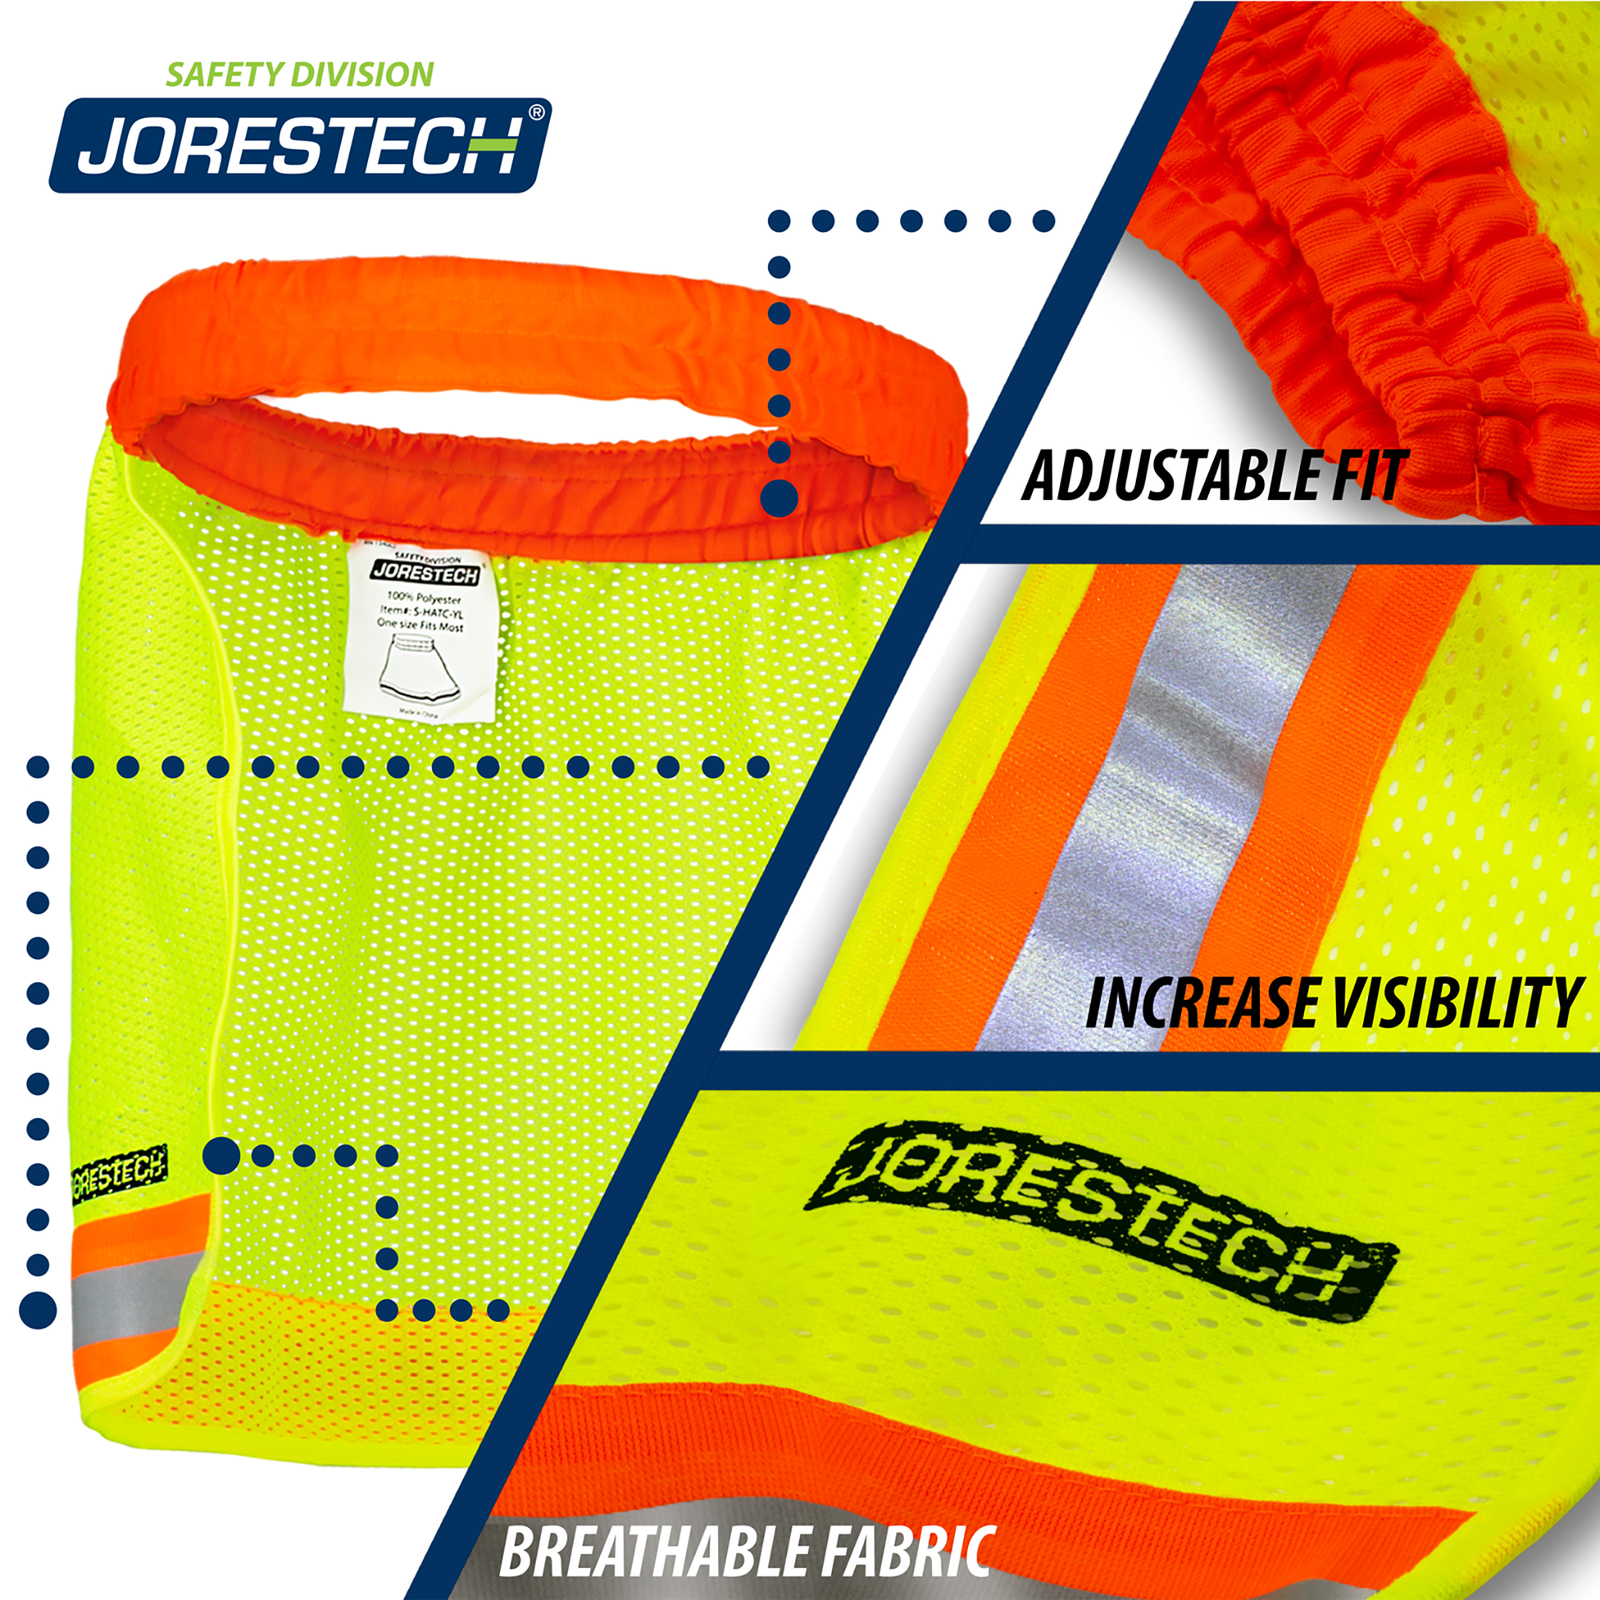 Shows a Hi-vis two tone, Lime and Orange hard hat JORESTECH neck shade with reflective strip and 3 call outs that read: adjustable fit, increase visibility, breathable mesh fabric